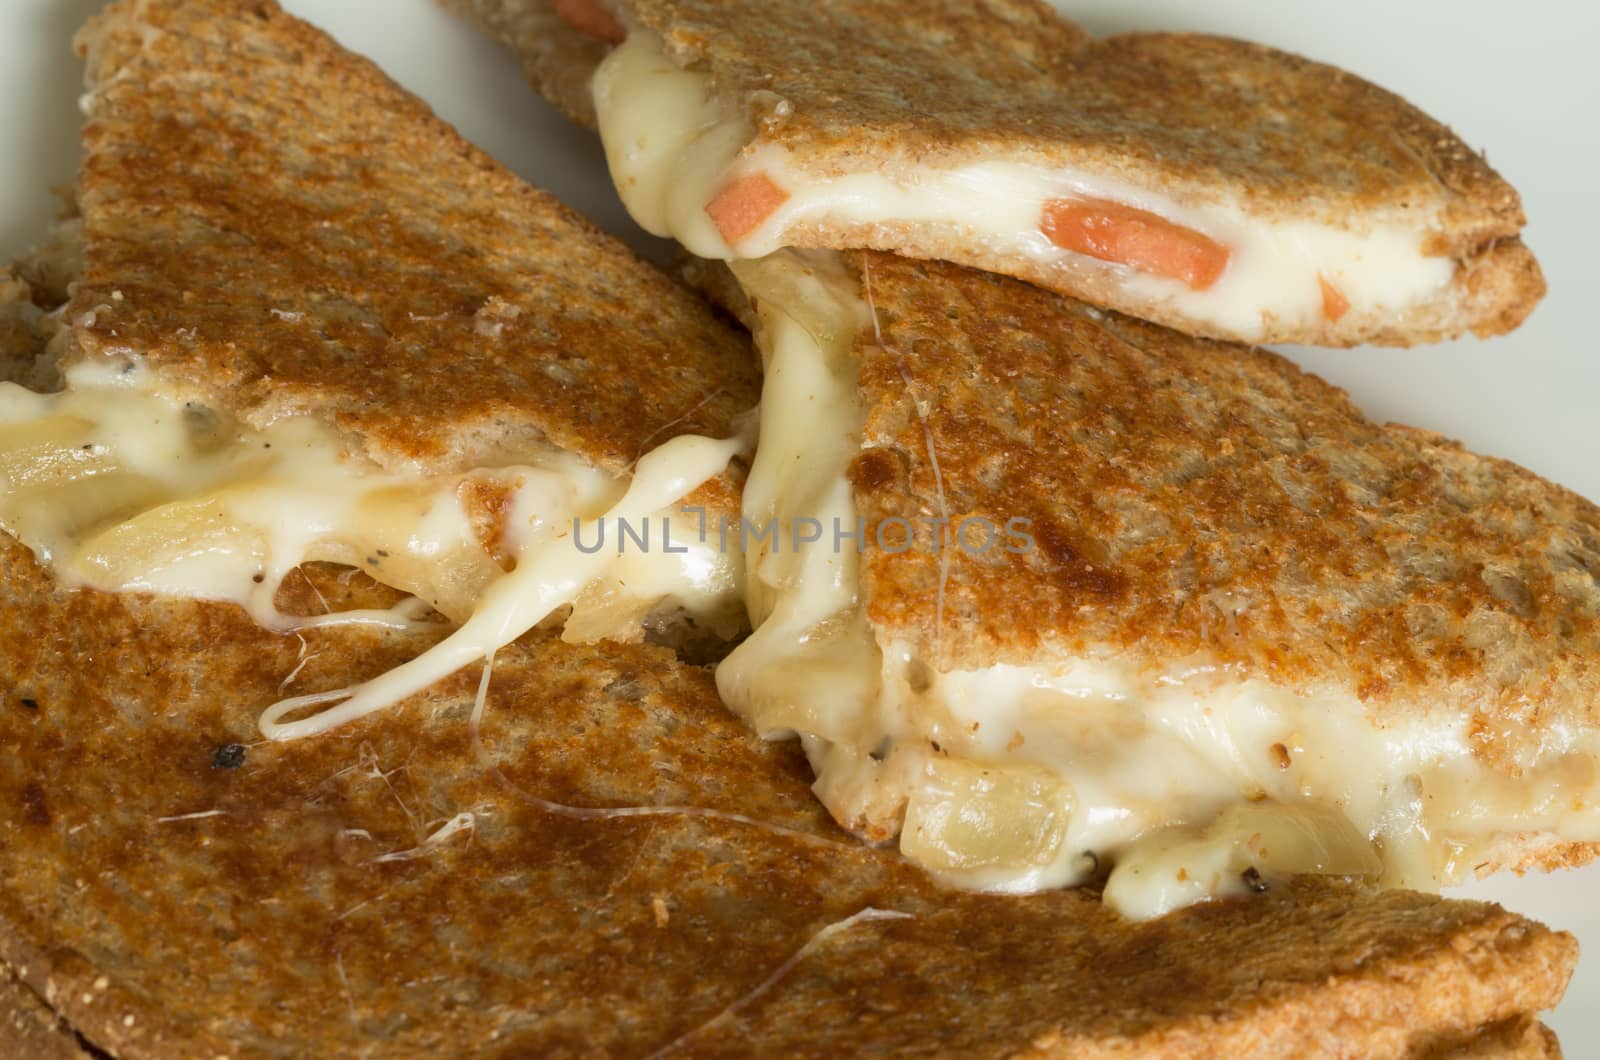 Cheesy grilled cheese sandwiches